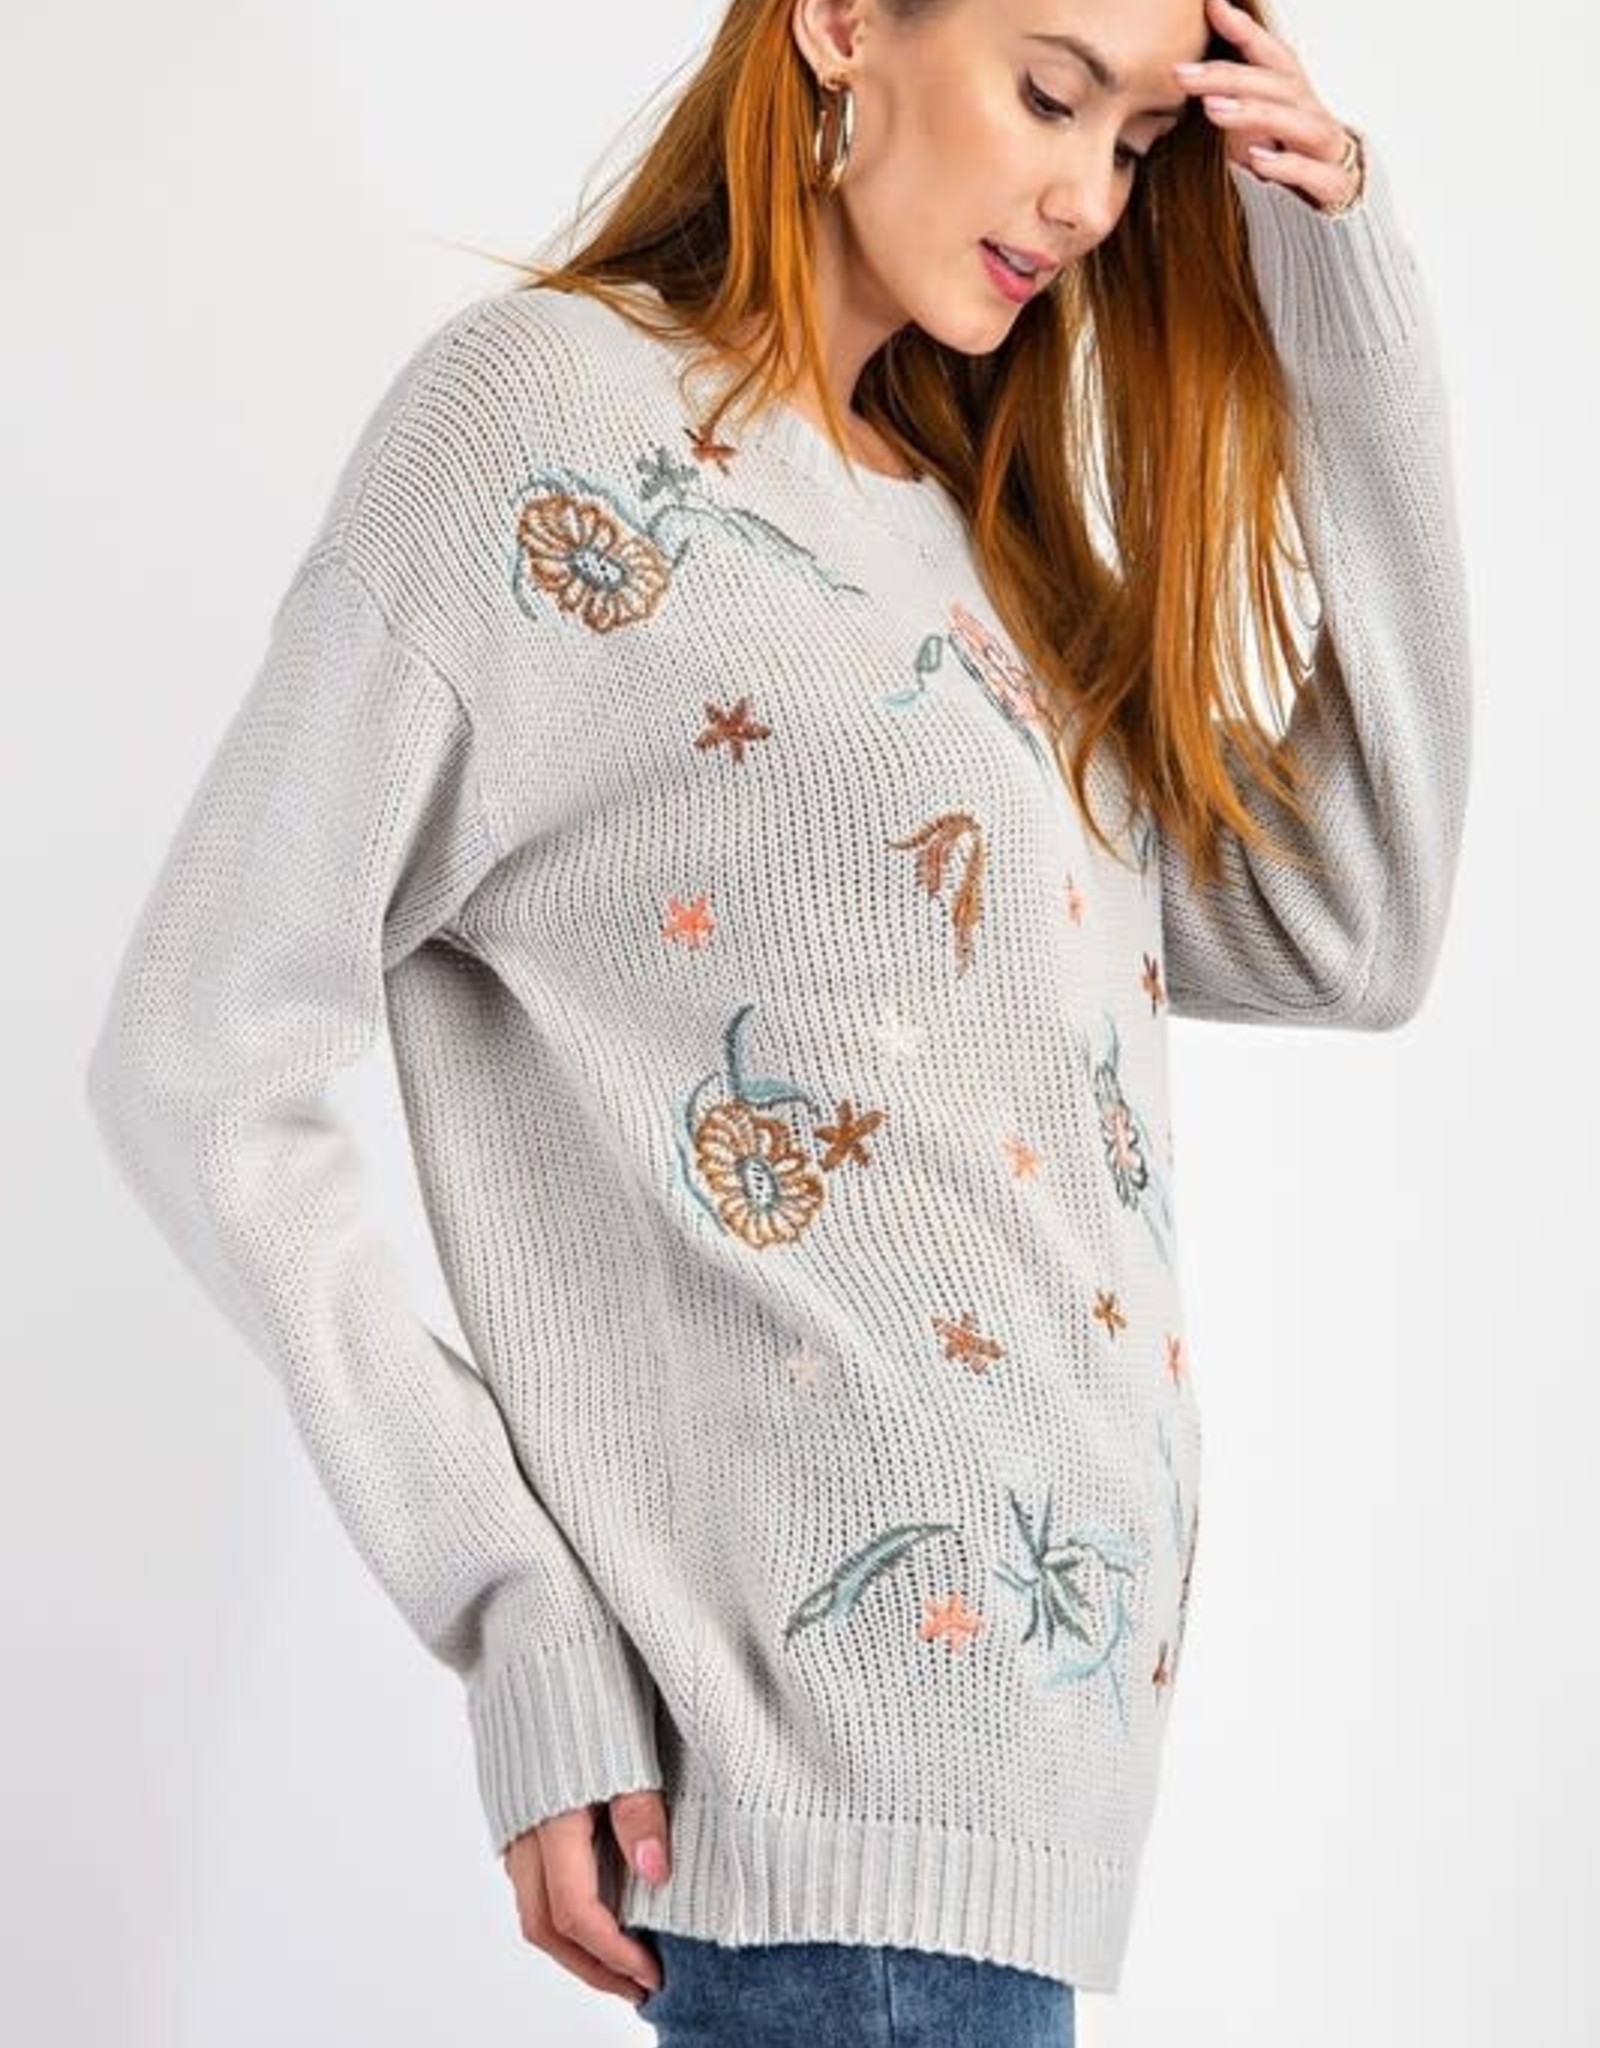 Easel Light Sweater with Embroidered Flowers